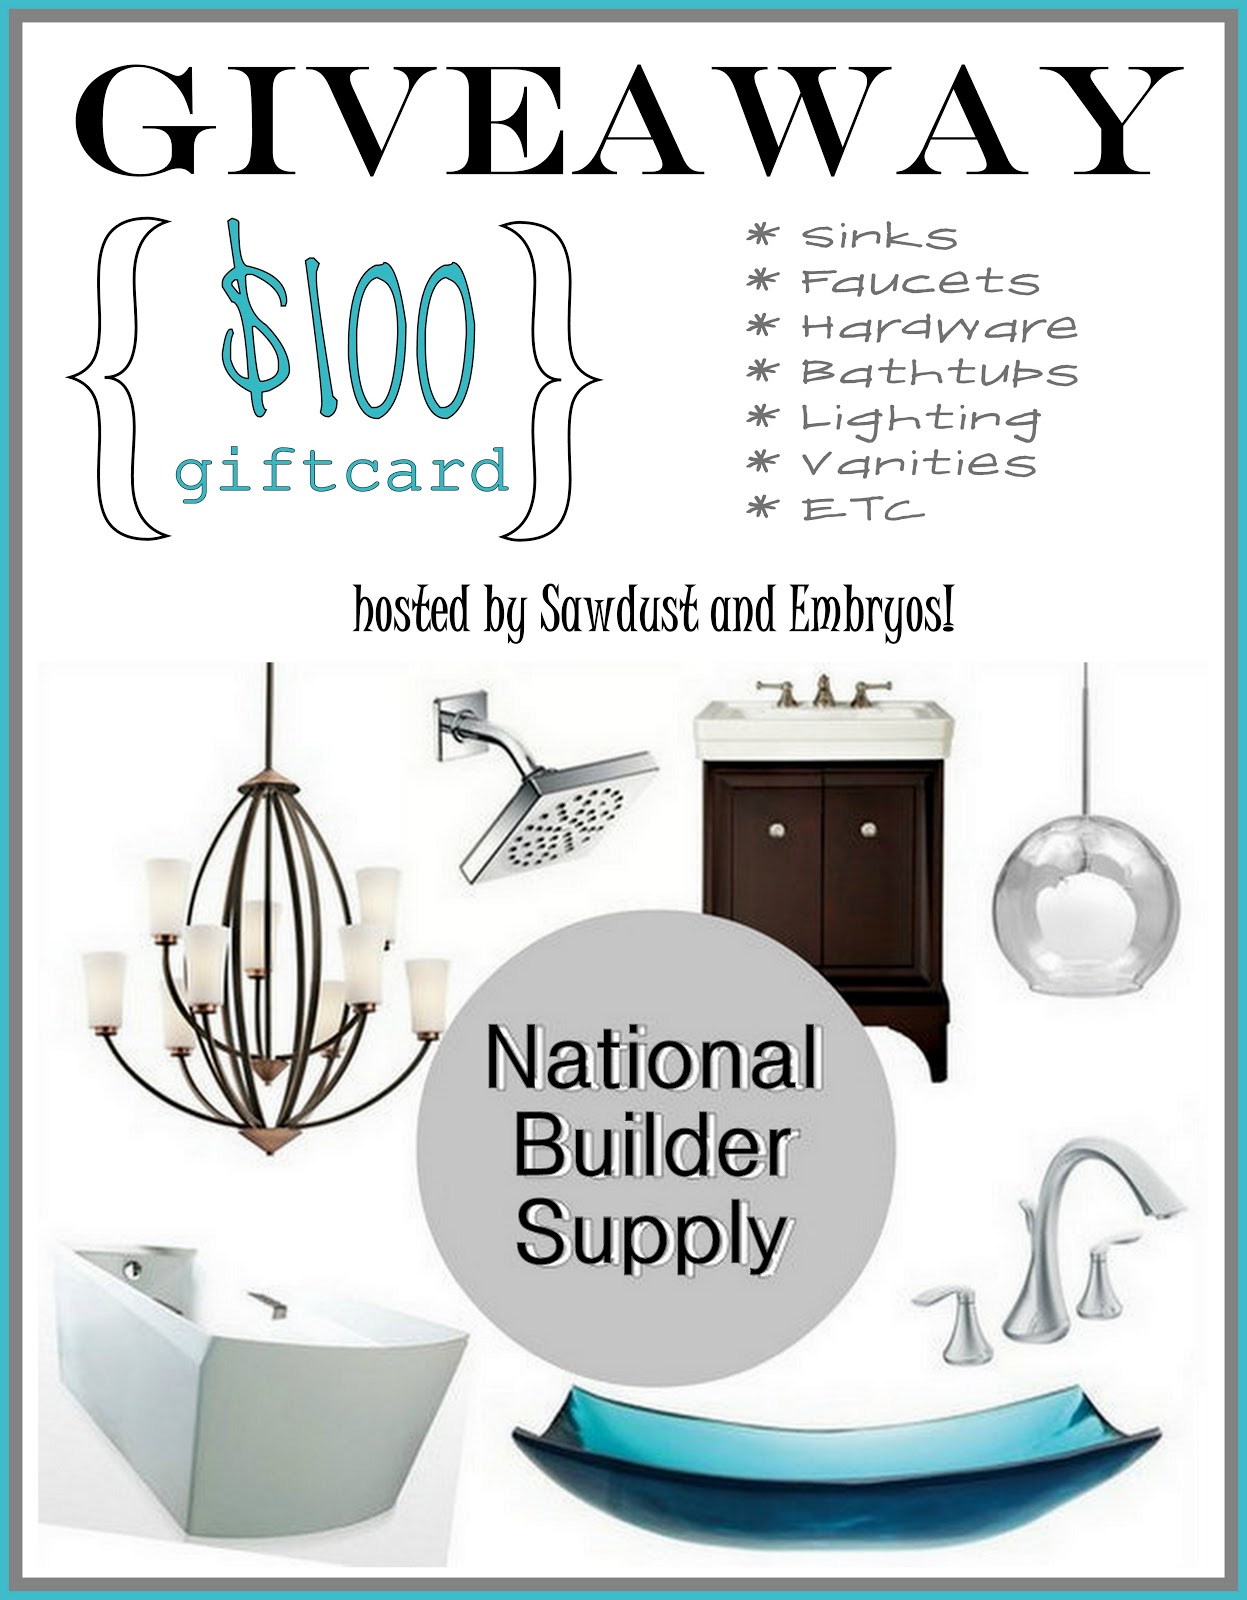 [GIVEAWAY%2521%2520National%2520Builder%2520Supply%2520%2524100%2520Giftcard%2520%257BSawdust%2520and%2520Embryos%257D%255B12%255D.jpg]